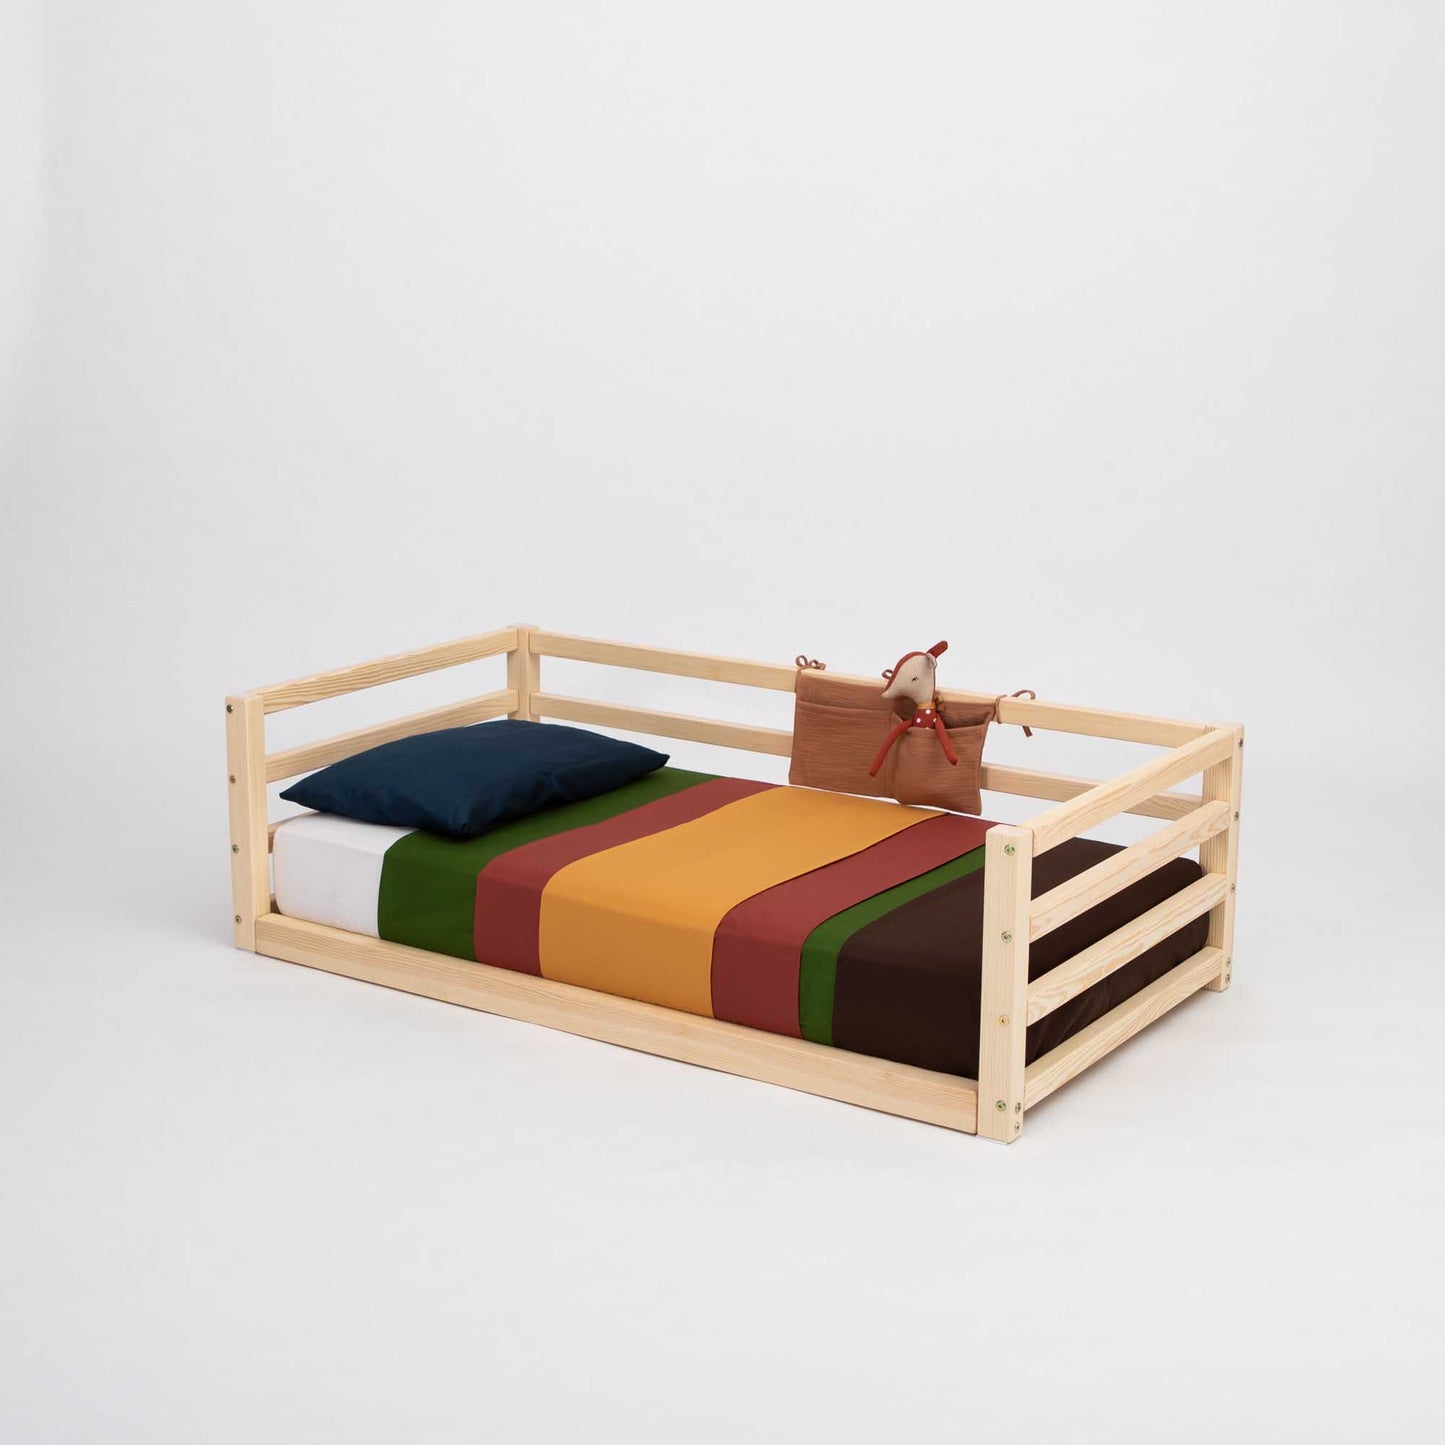 A Sweet Home From Wood children's floor level bed with 3-sided safety rail featuring colorful stripes and wooden slats.